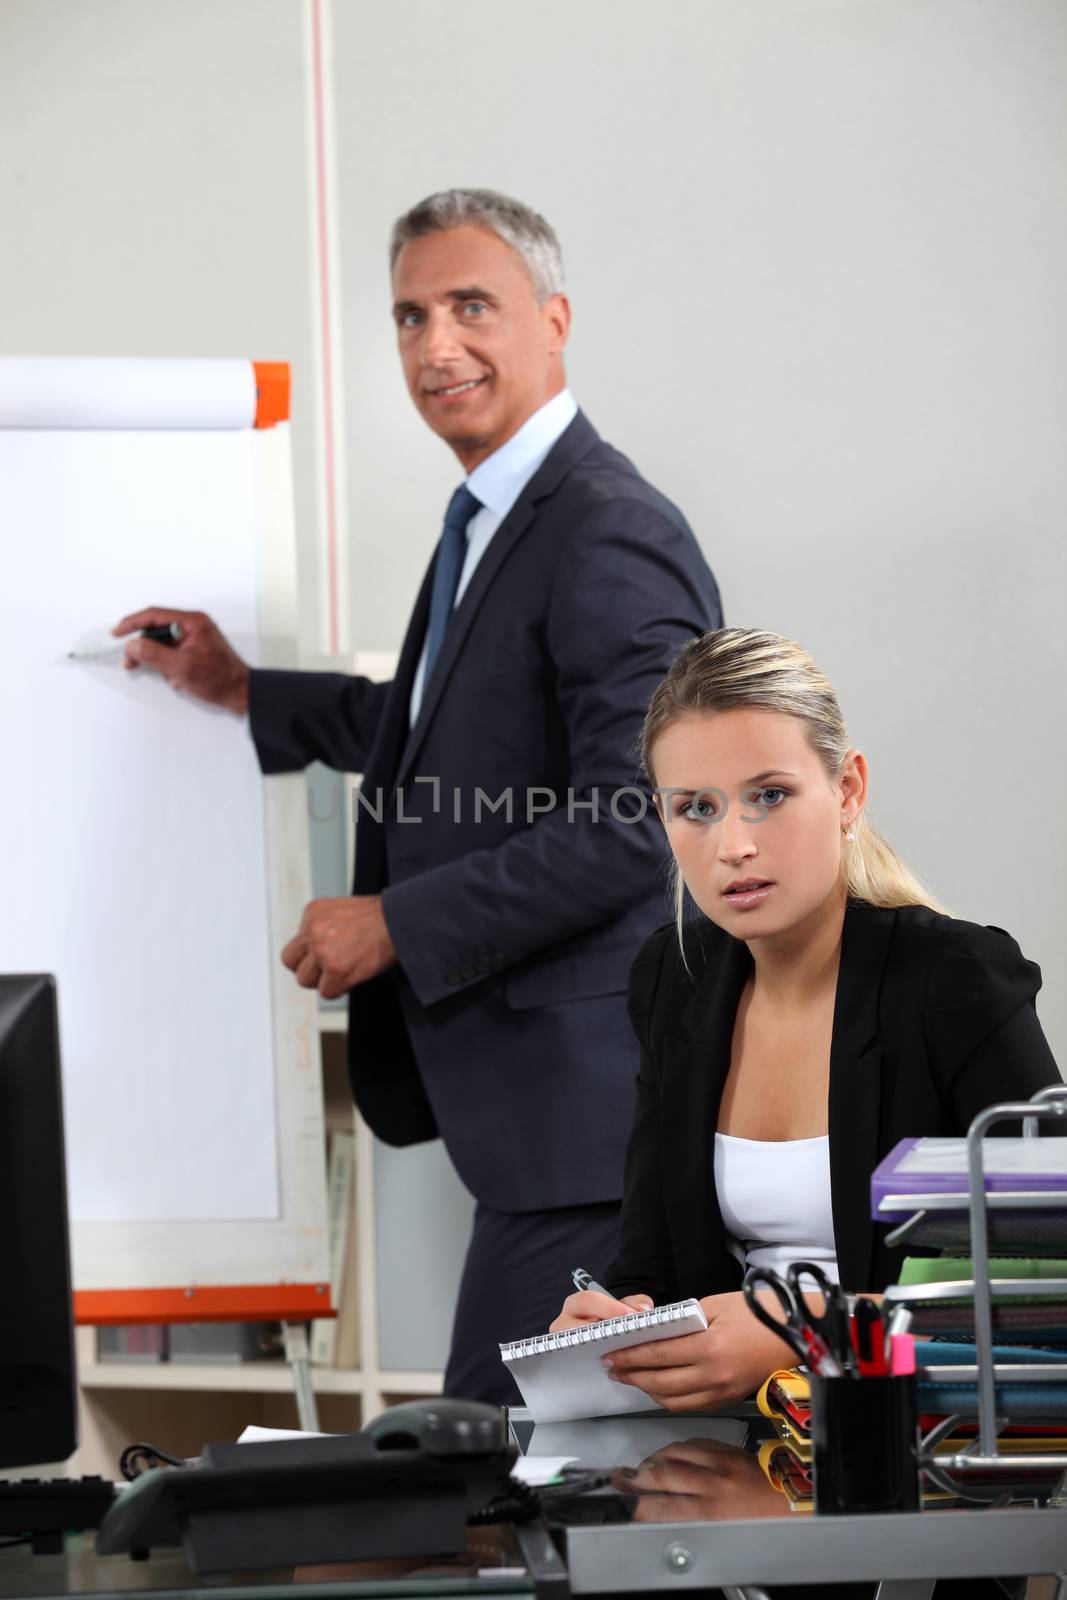 Boss explaining theory to assistant by phovoir